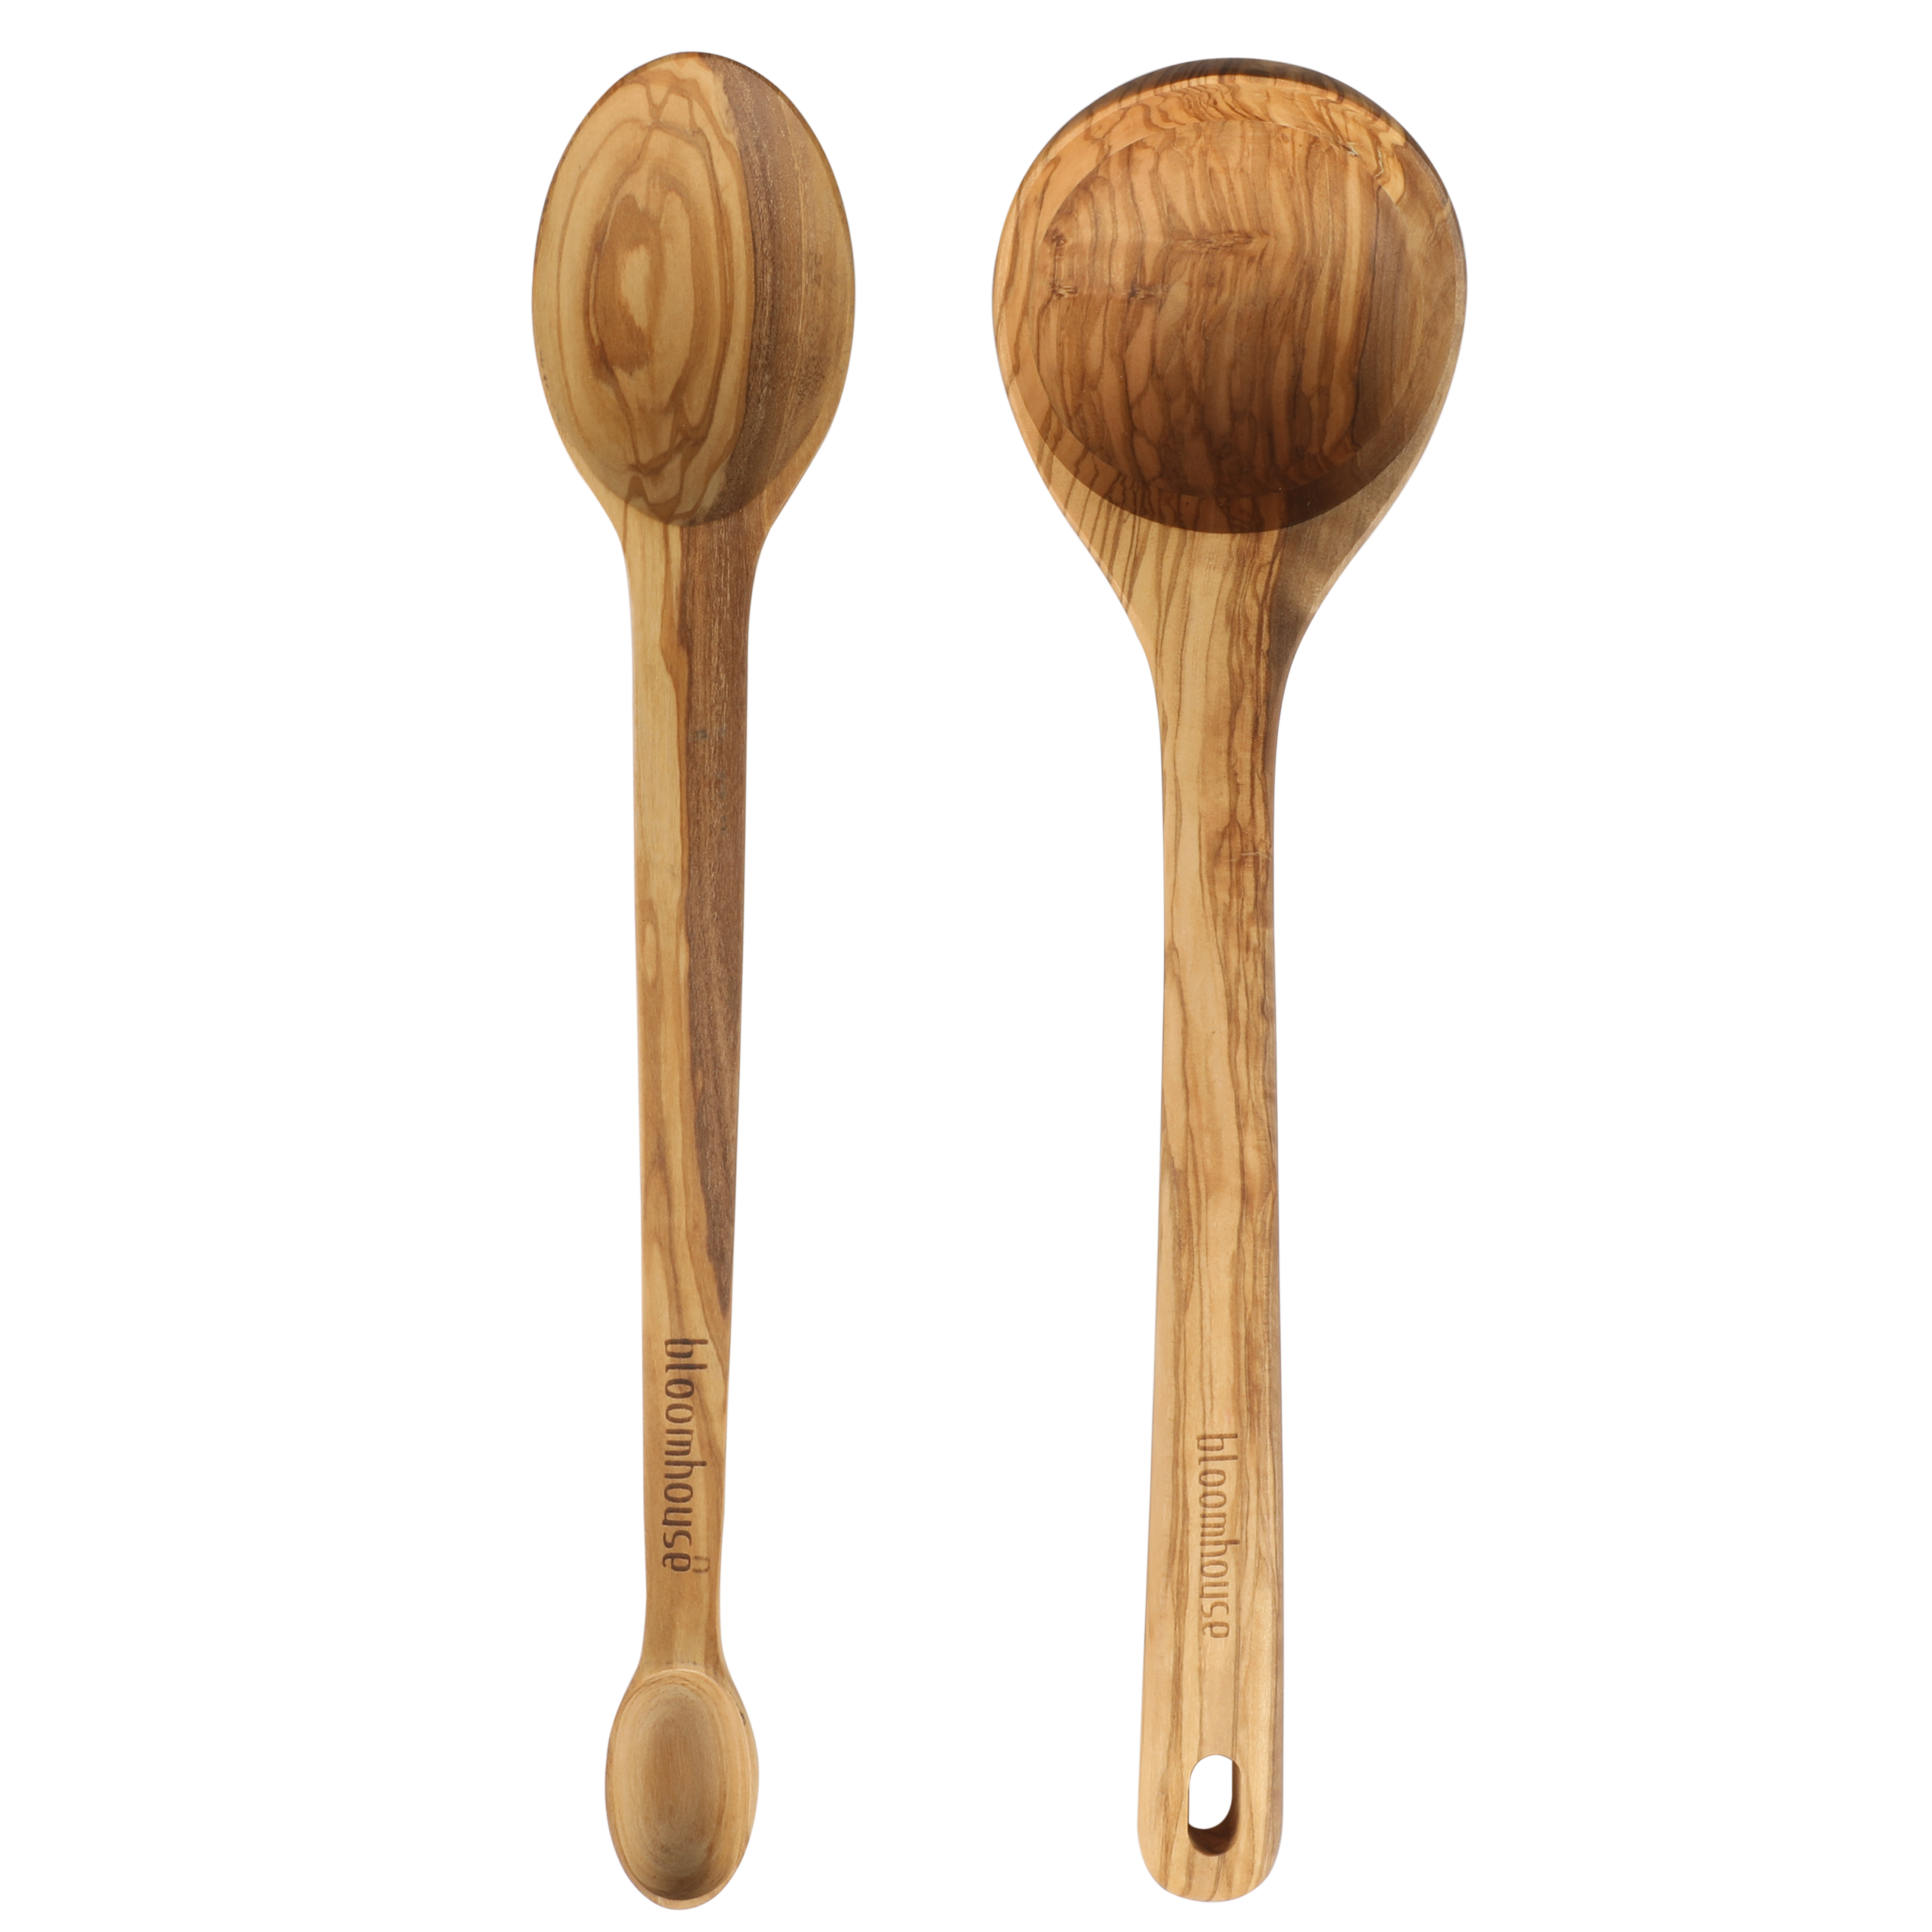 Bloomhouse Italian Olive Wood 2-Piece Extra-Large 14 Inch Ladle and Tasting Spoon Set